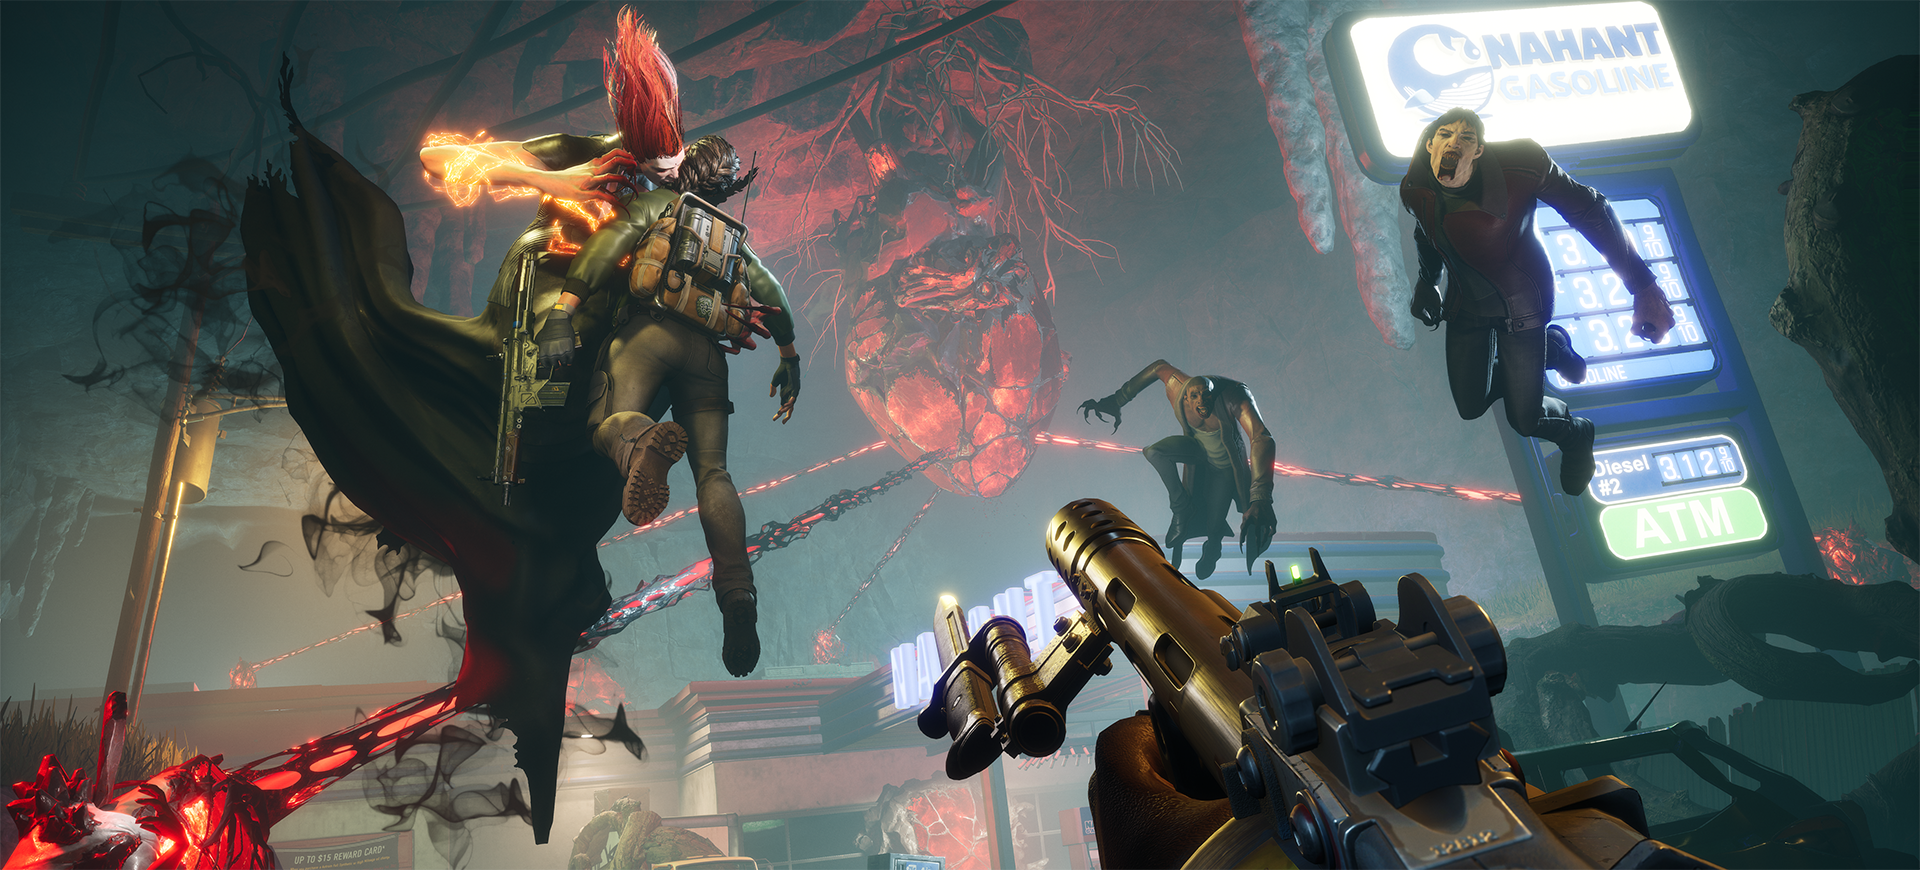 A player aims a machine gun into the sky, where a Vampire enemy is devouring an NPC in an urban area in Redfall